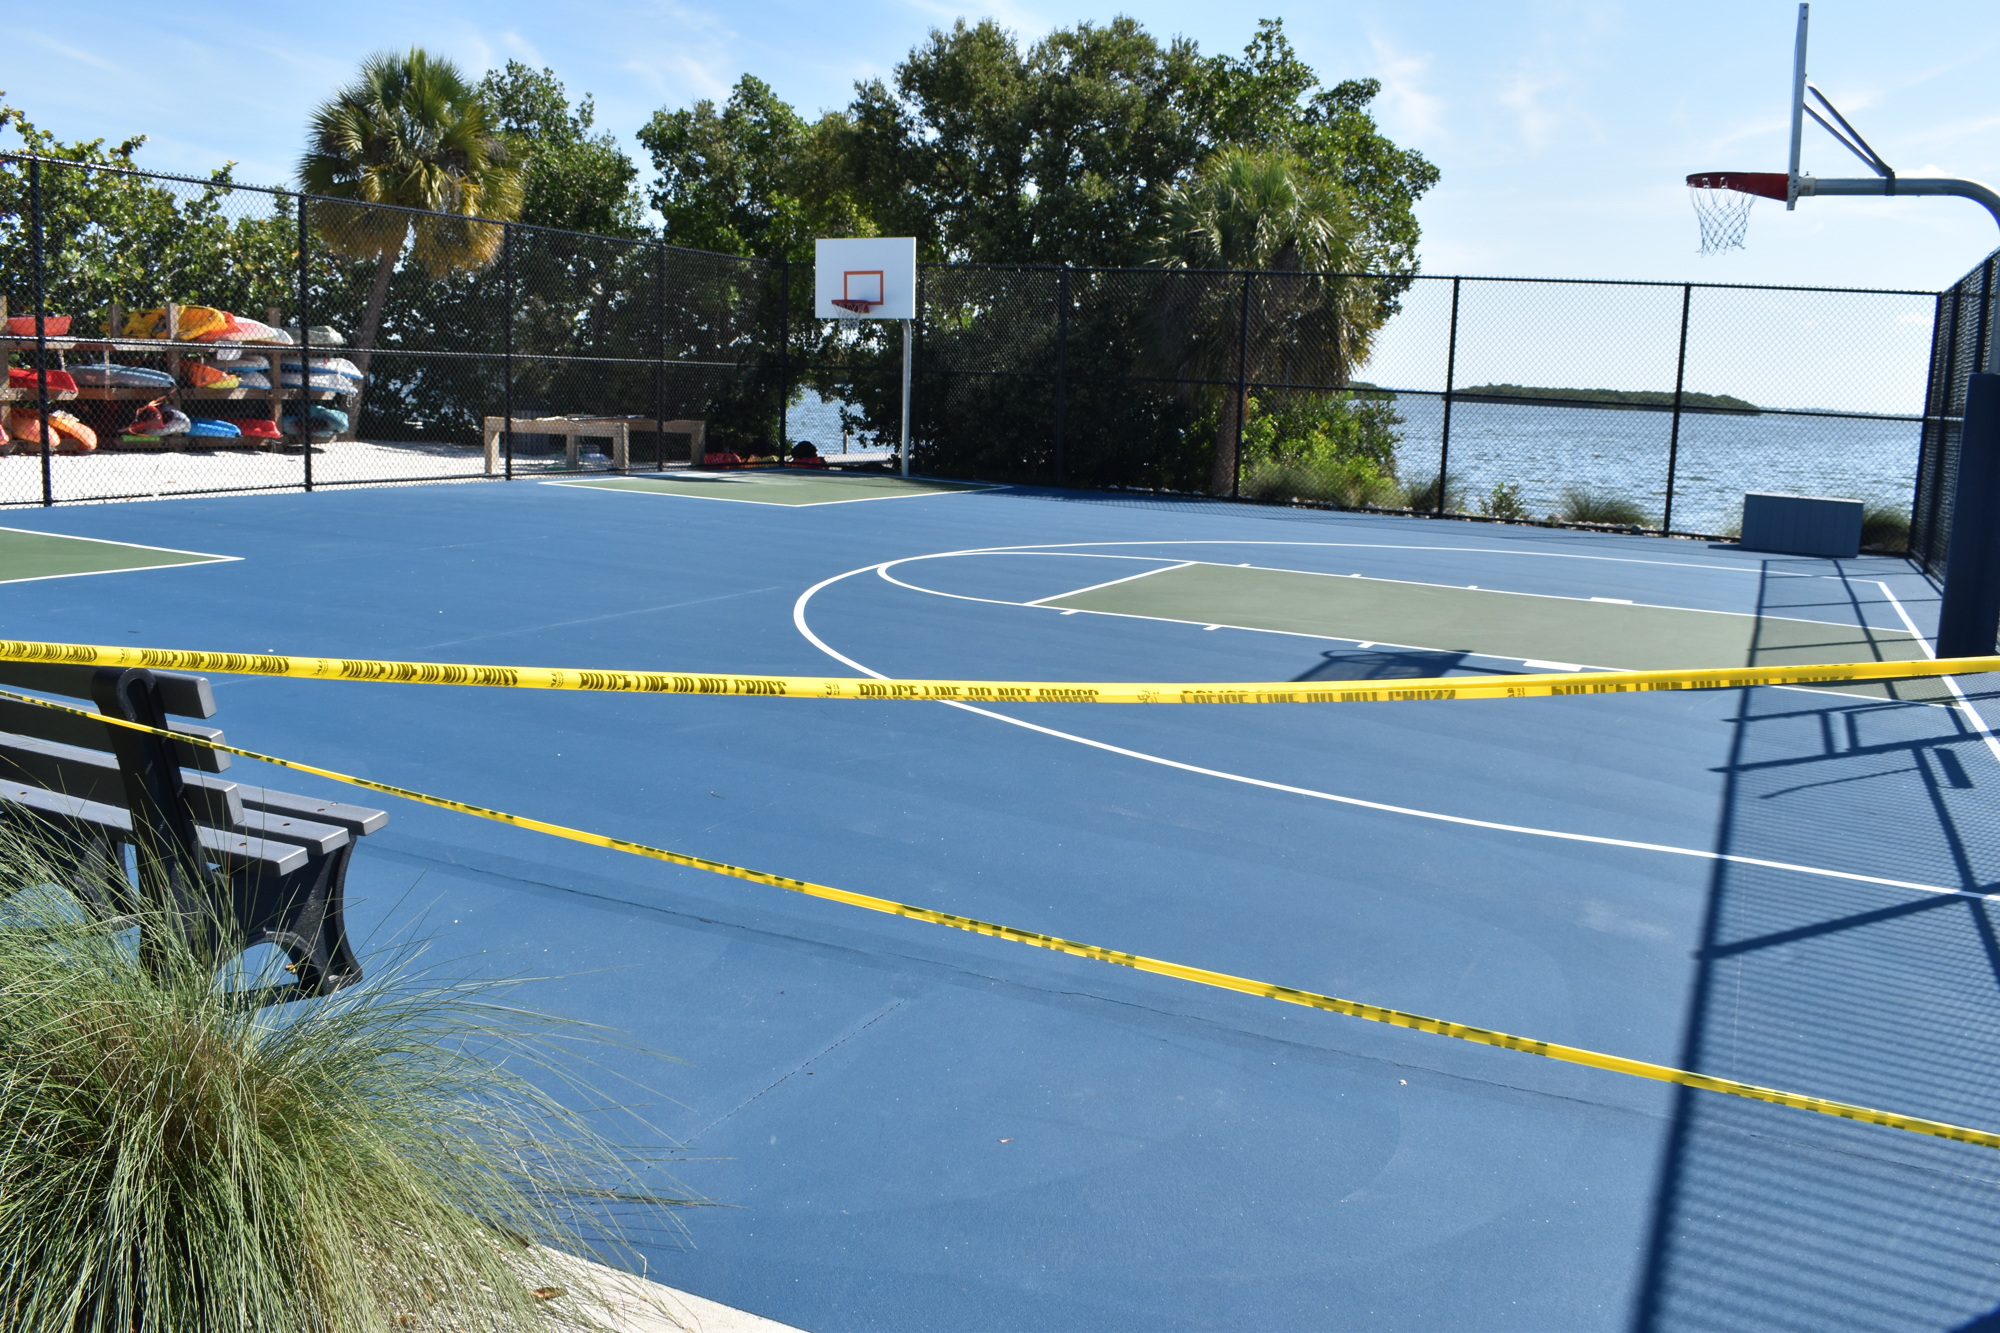 The town of Longboat Key closed its public recreation areas at Bayfront Park on March 22.